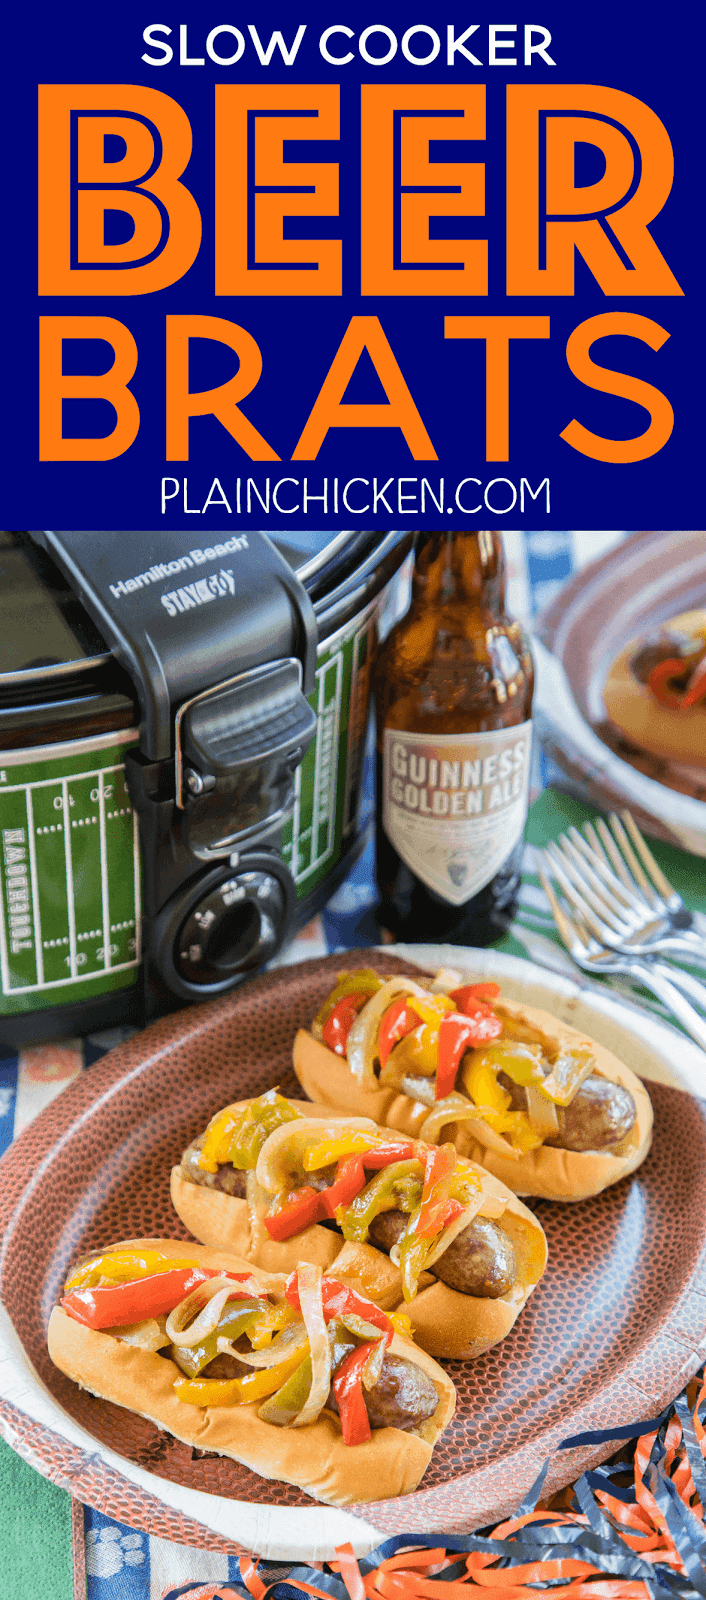 Slow Cooker Beer Brats - perfect tailgating food! Just toss everything in the slow cooker and let it work its magic. Can serve out of the slow cooker too! SO easy and the brats taste amazing!! Brats, beer, onion, bell peppers, salt, pepper, Worcestershire and garlic. A real crowd pleaser!